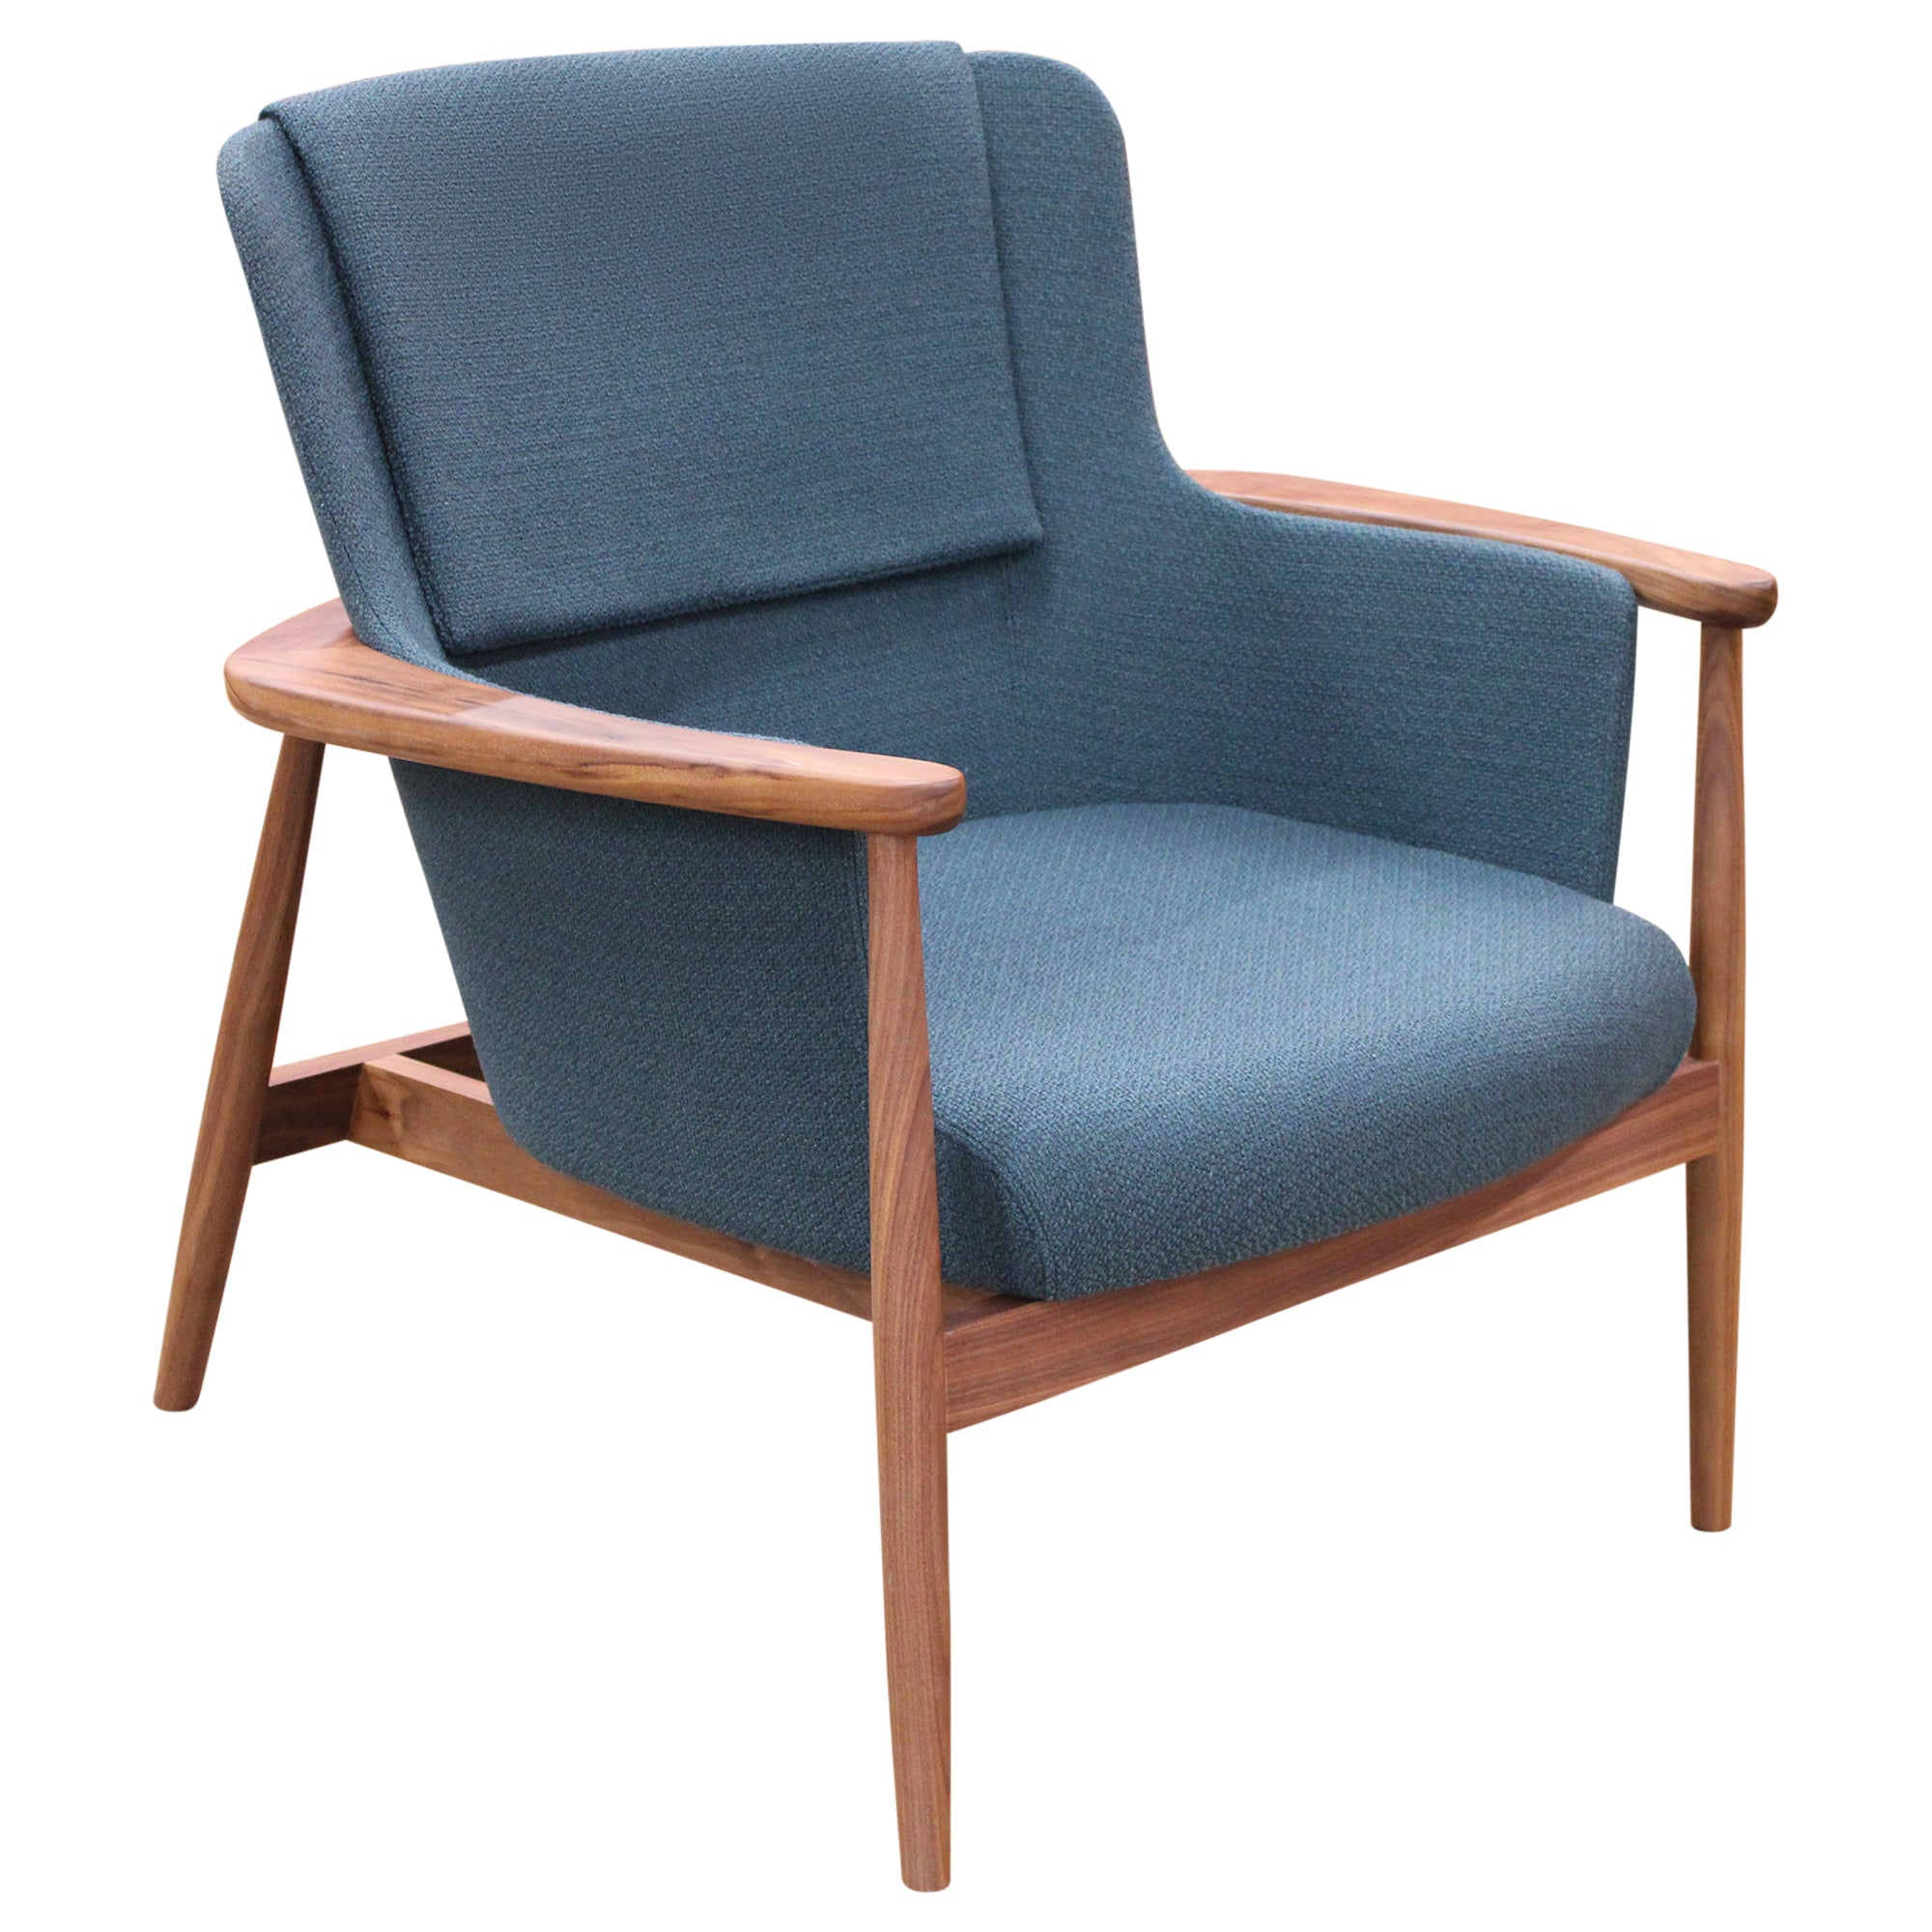 National Hobsen Lounge Chair, Green - Preowned